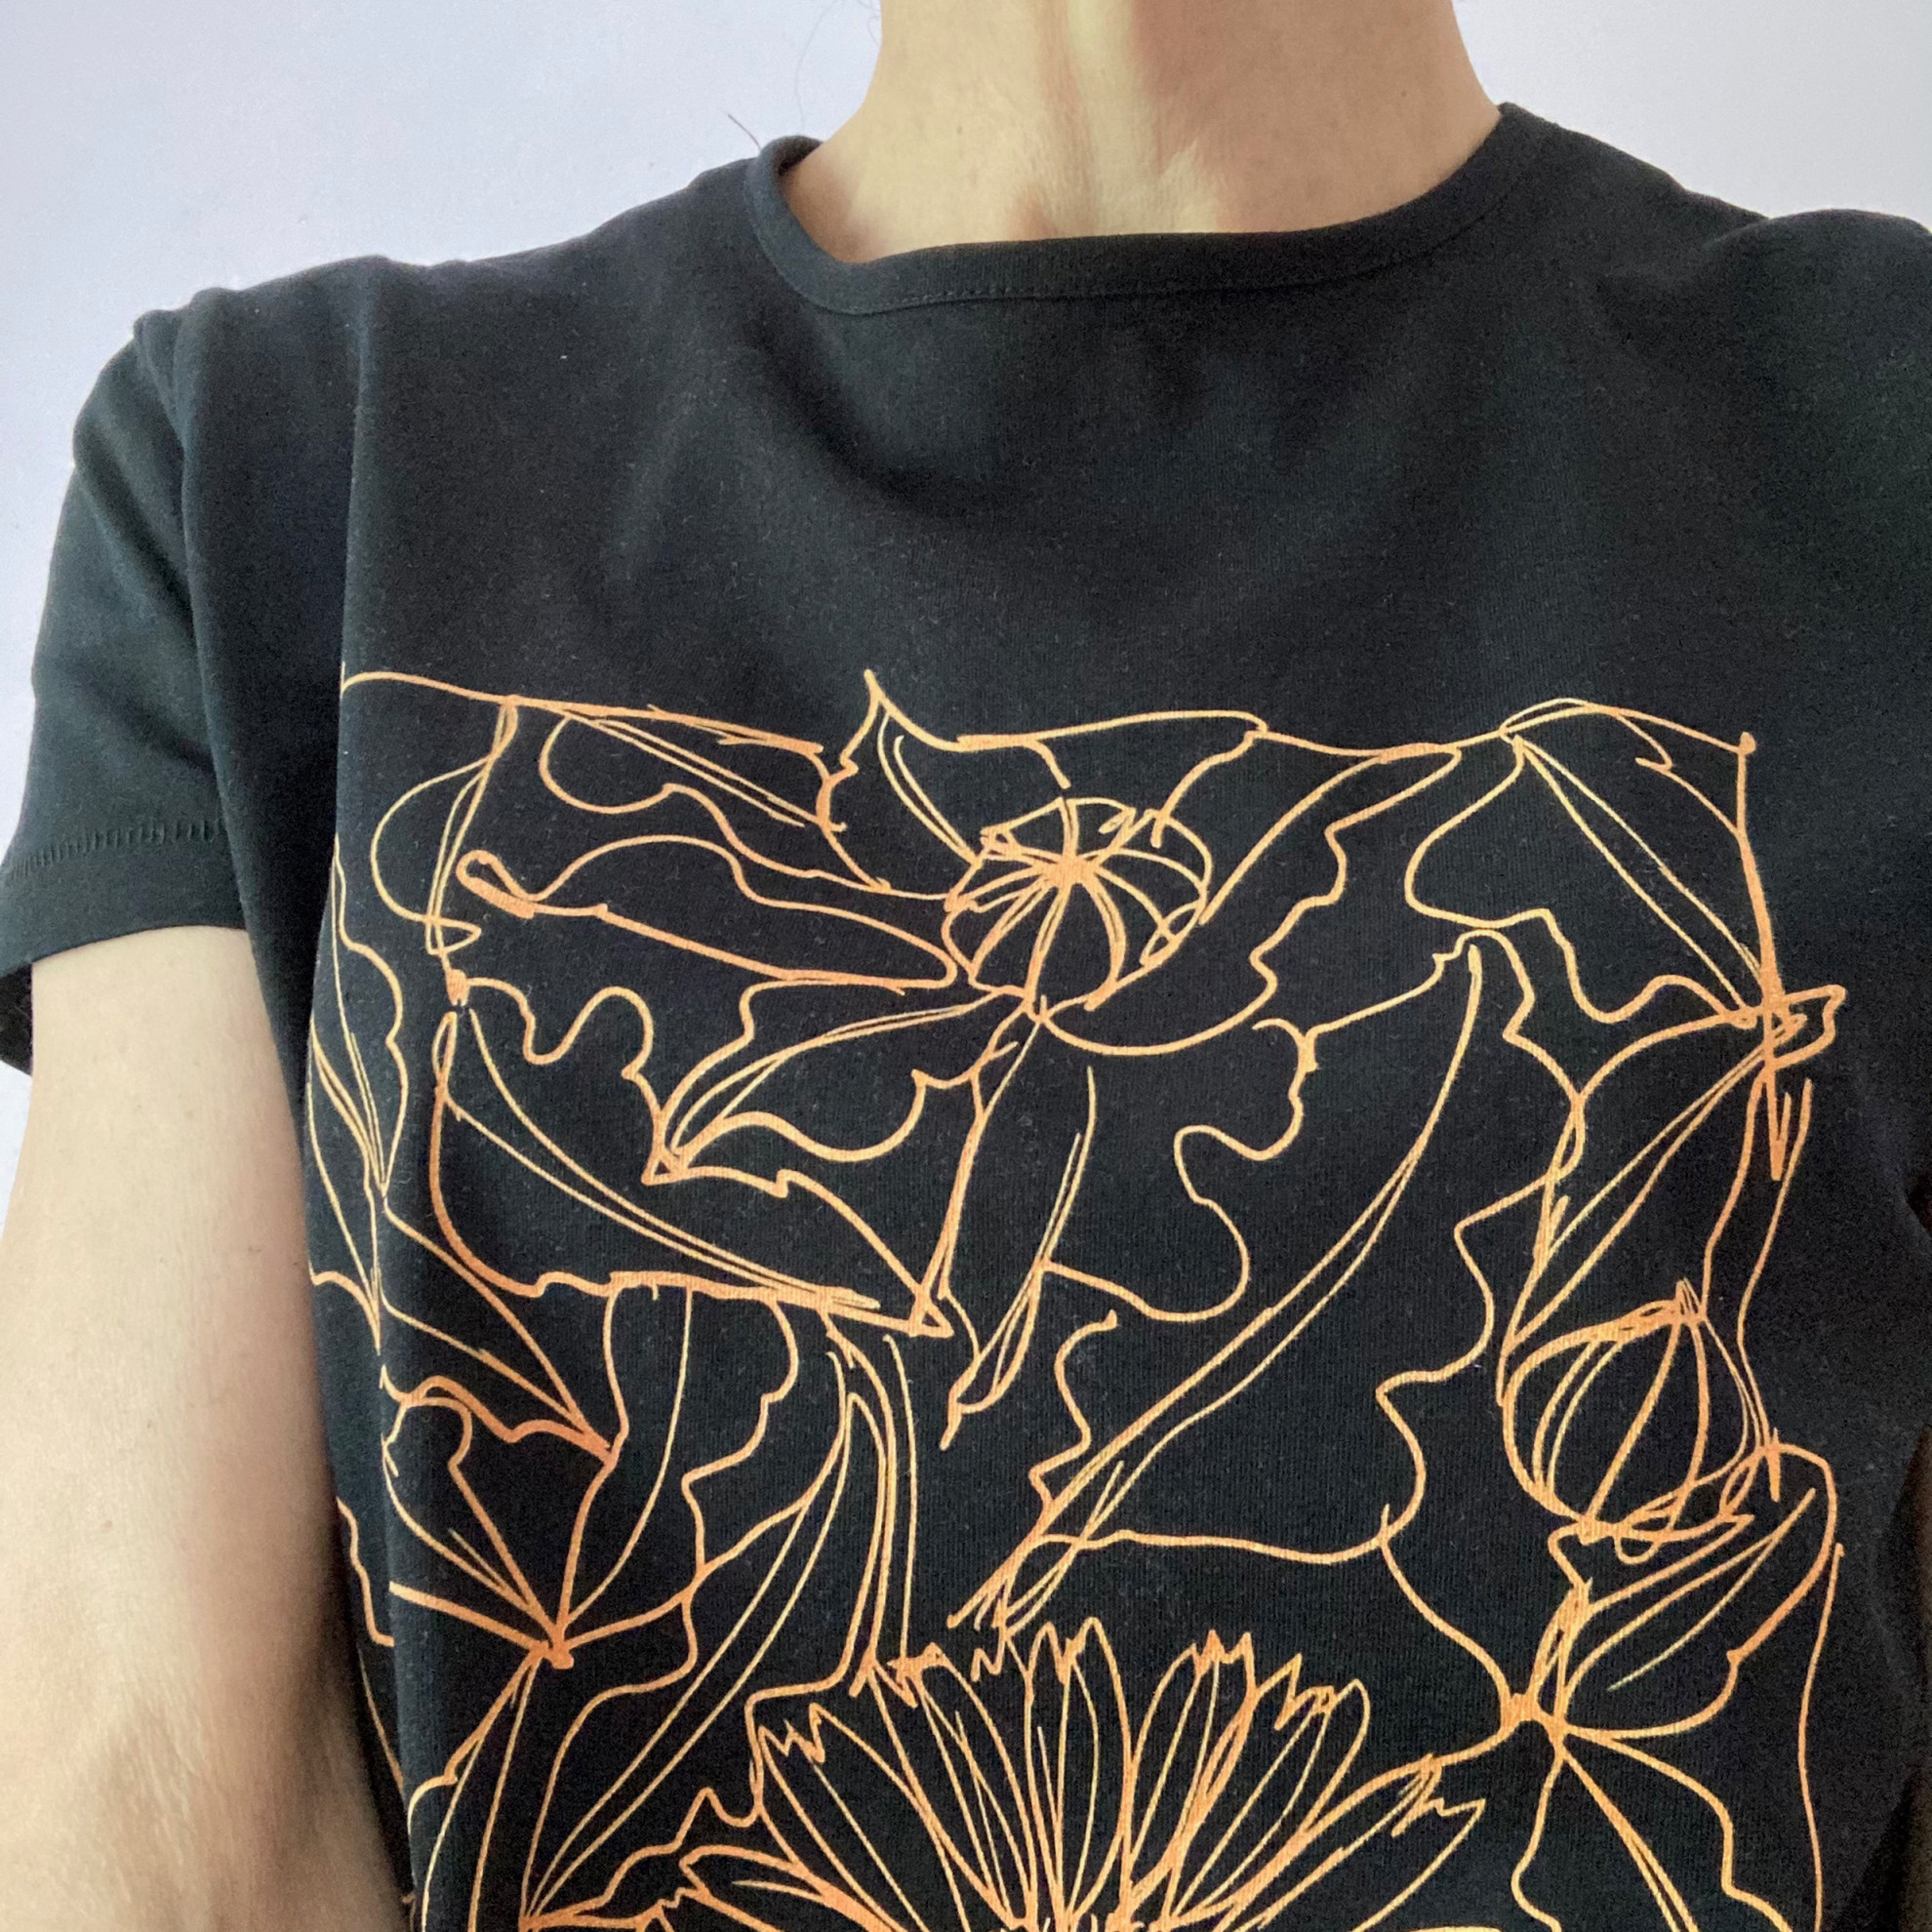 Marigold t-shirt designed by Lydia Thornley